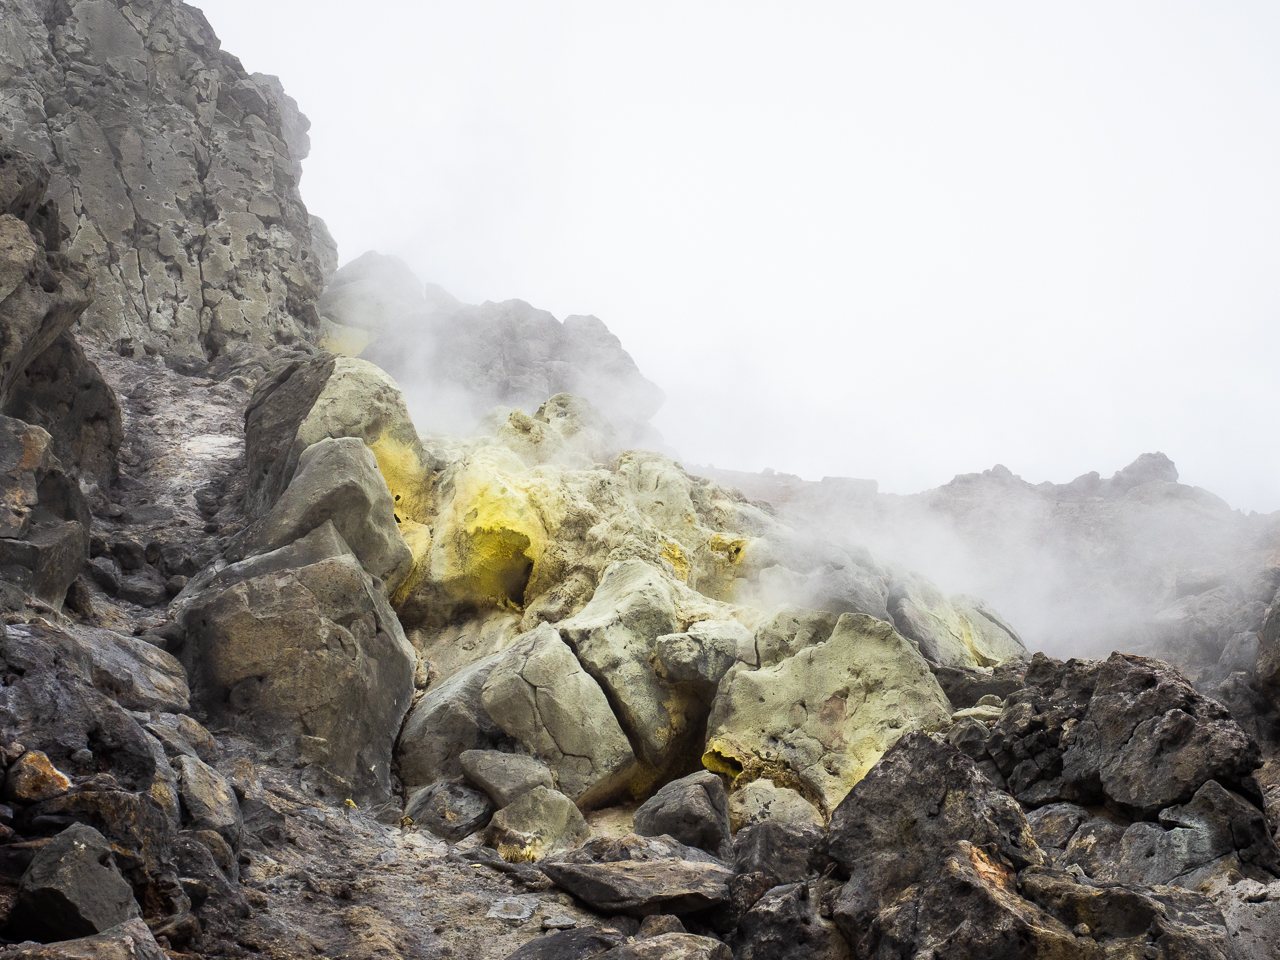 A fumarole (volcanic fissure) releasing steam and sulphur dioxide near the summit of Mount Yake, a volcano in Kamikōchi (the Upper Highlands) in the Hida Mountains, Nagano Prefecture, Japan.